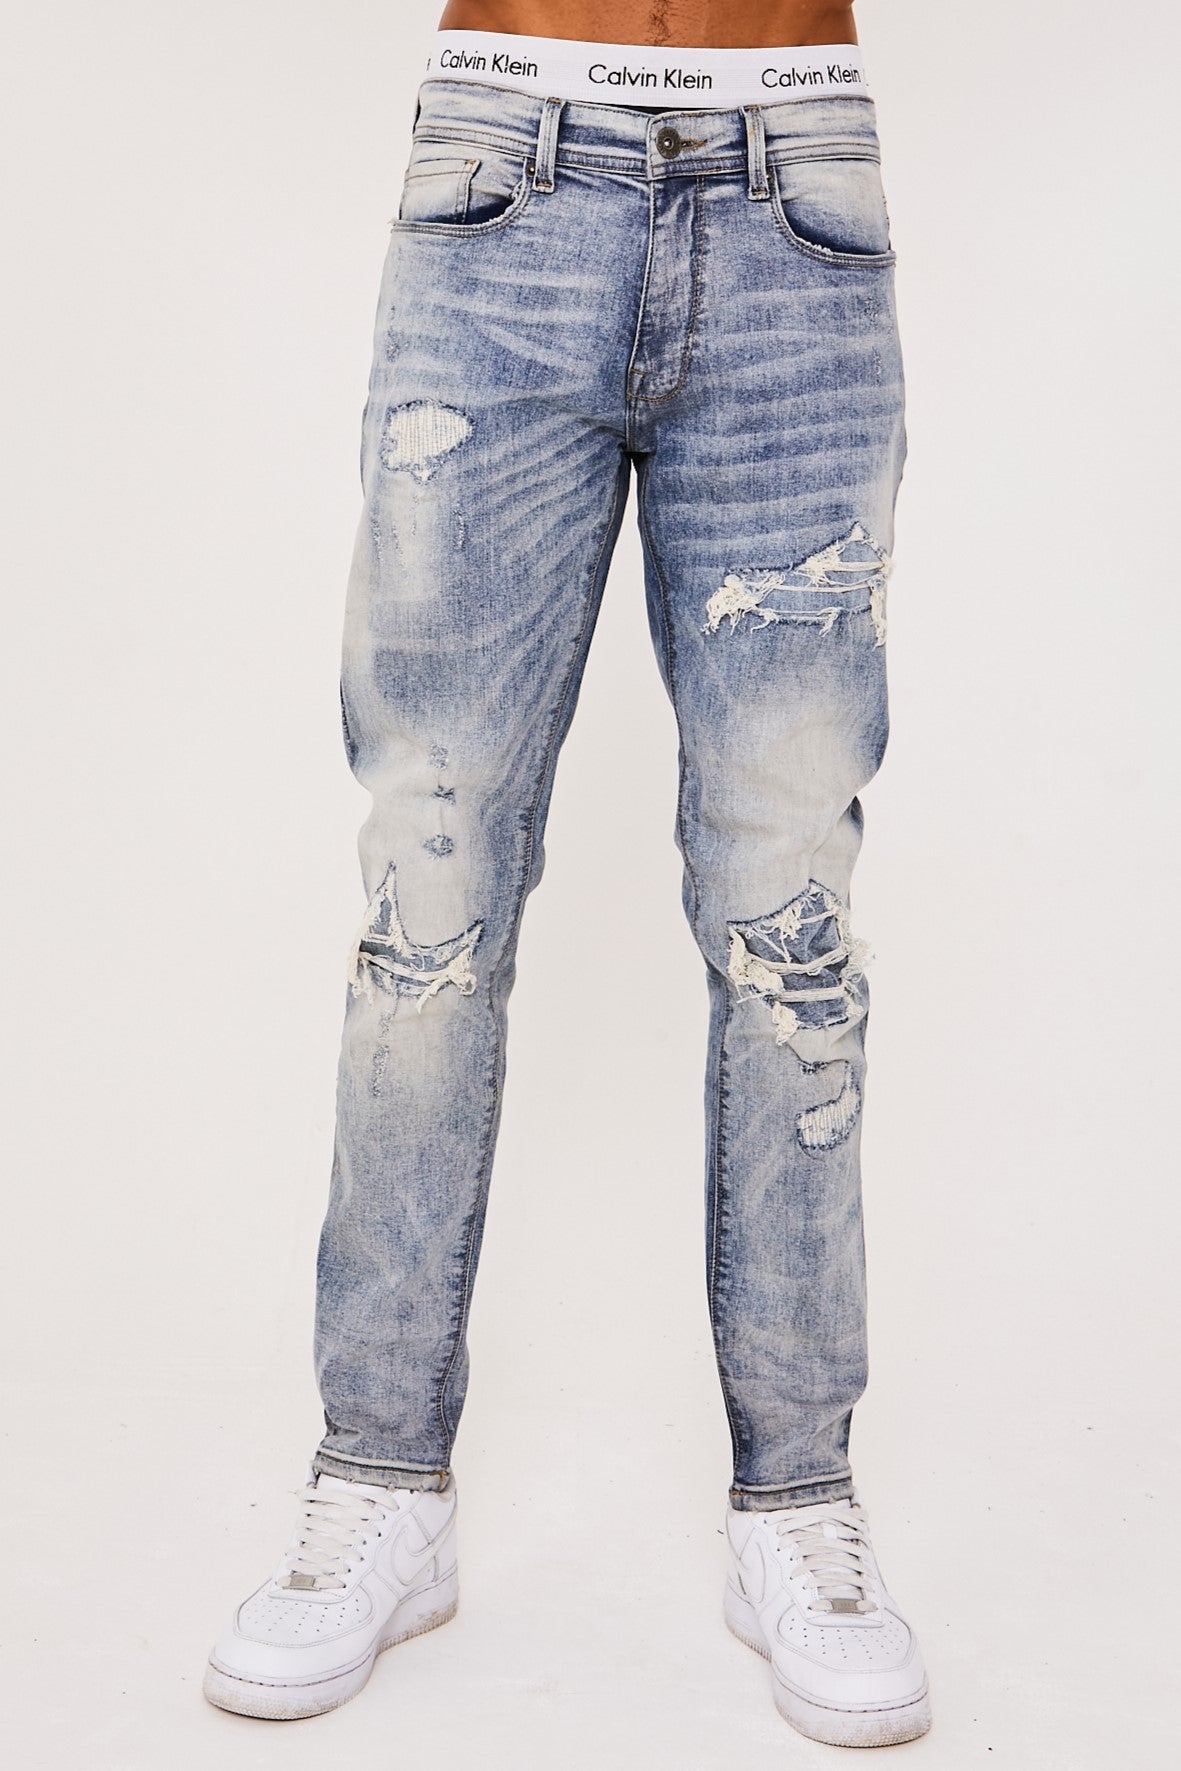 Mens Jeans Washed Light Blue Tapered Slim Rip & Repair Holborn – Voi London